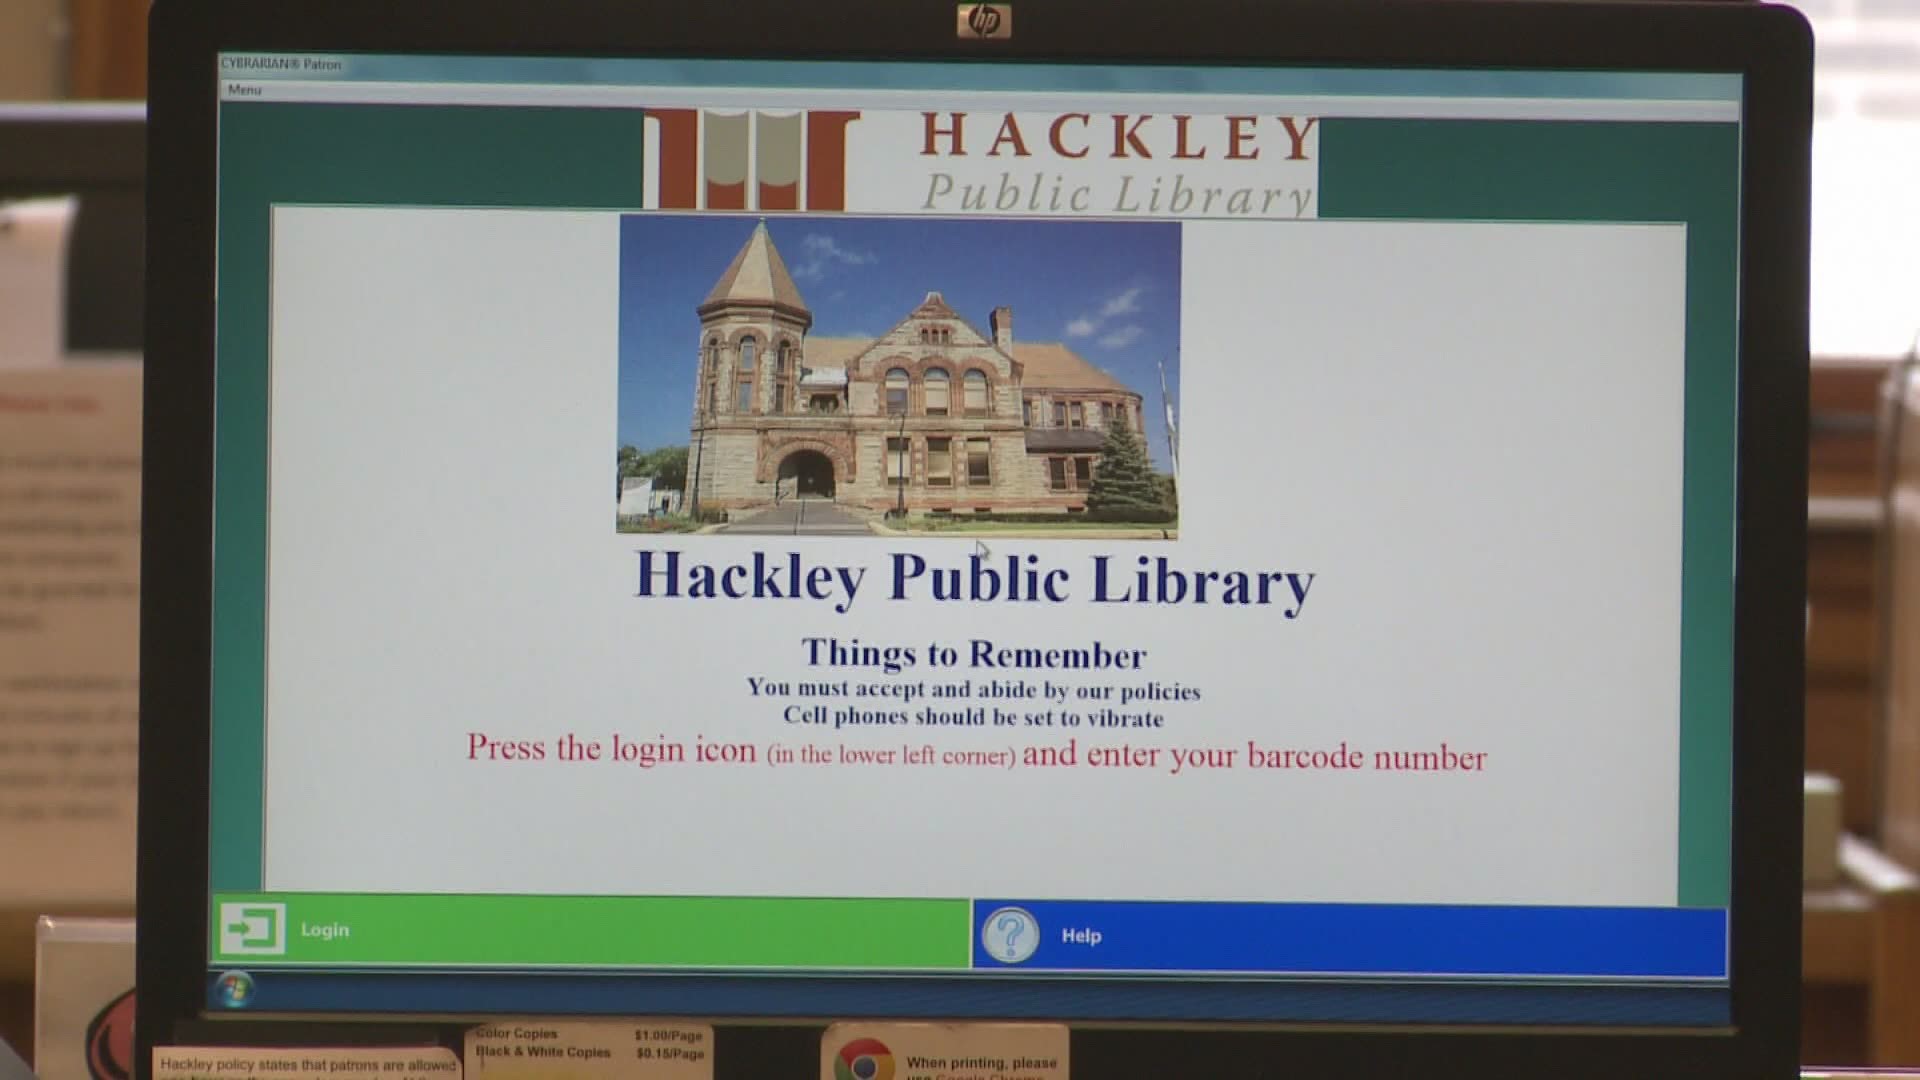 Hackley Library in Muskegon still open for "Virtual" Business